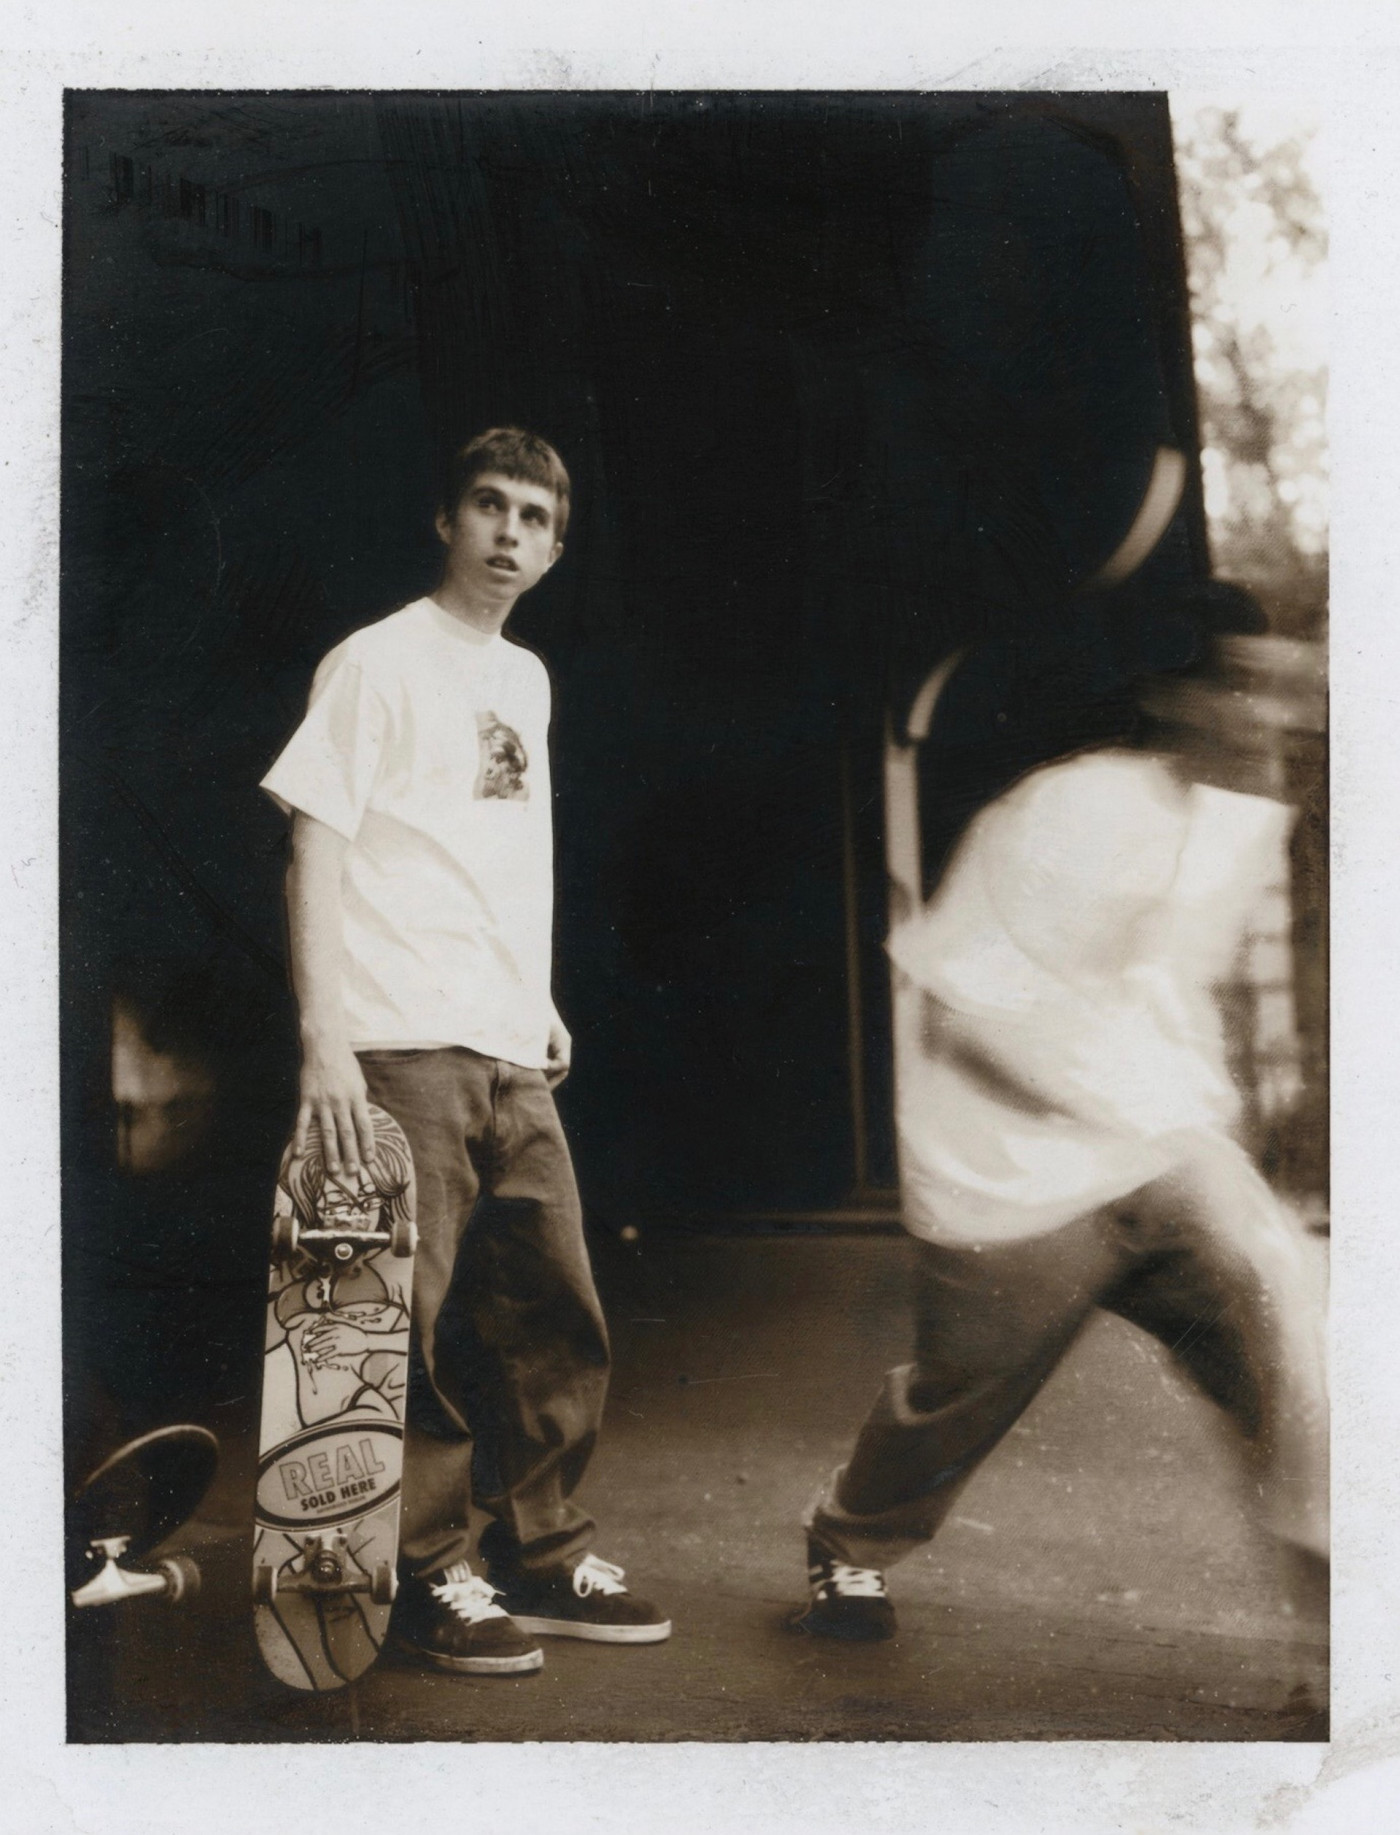 90s skater Fashion Popularly Referred To in the Skate Core era, by History  fashion